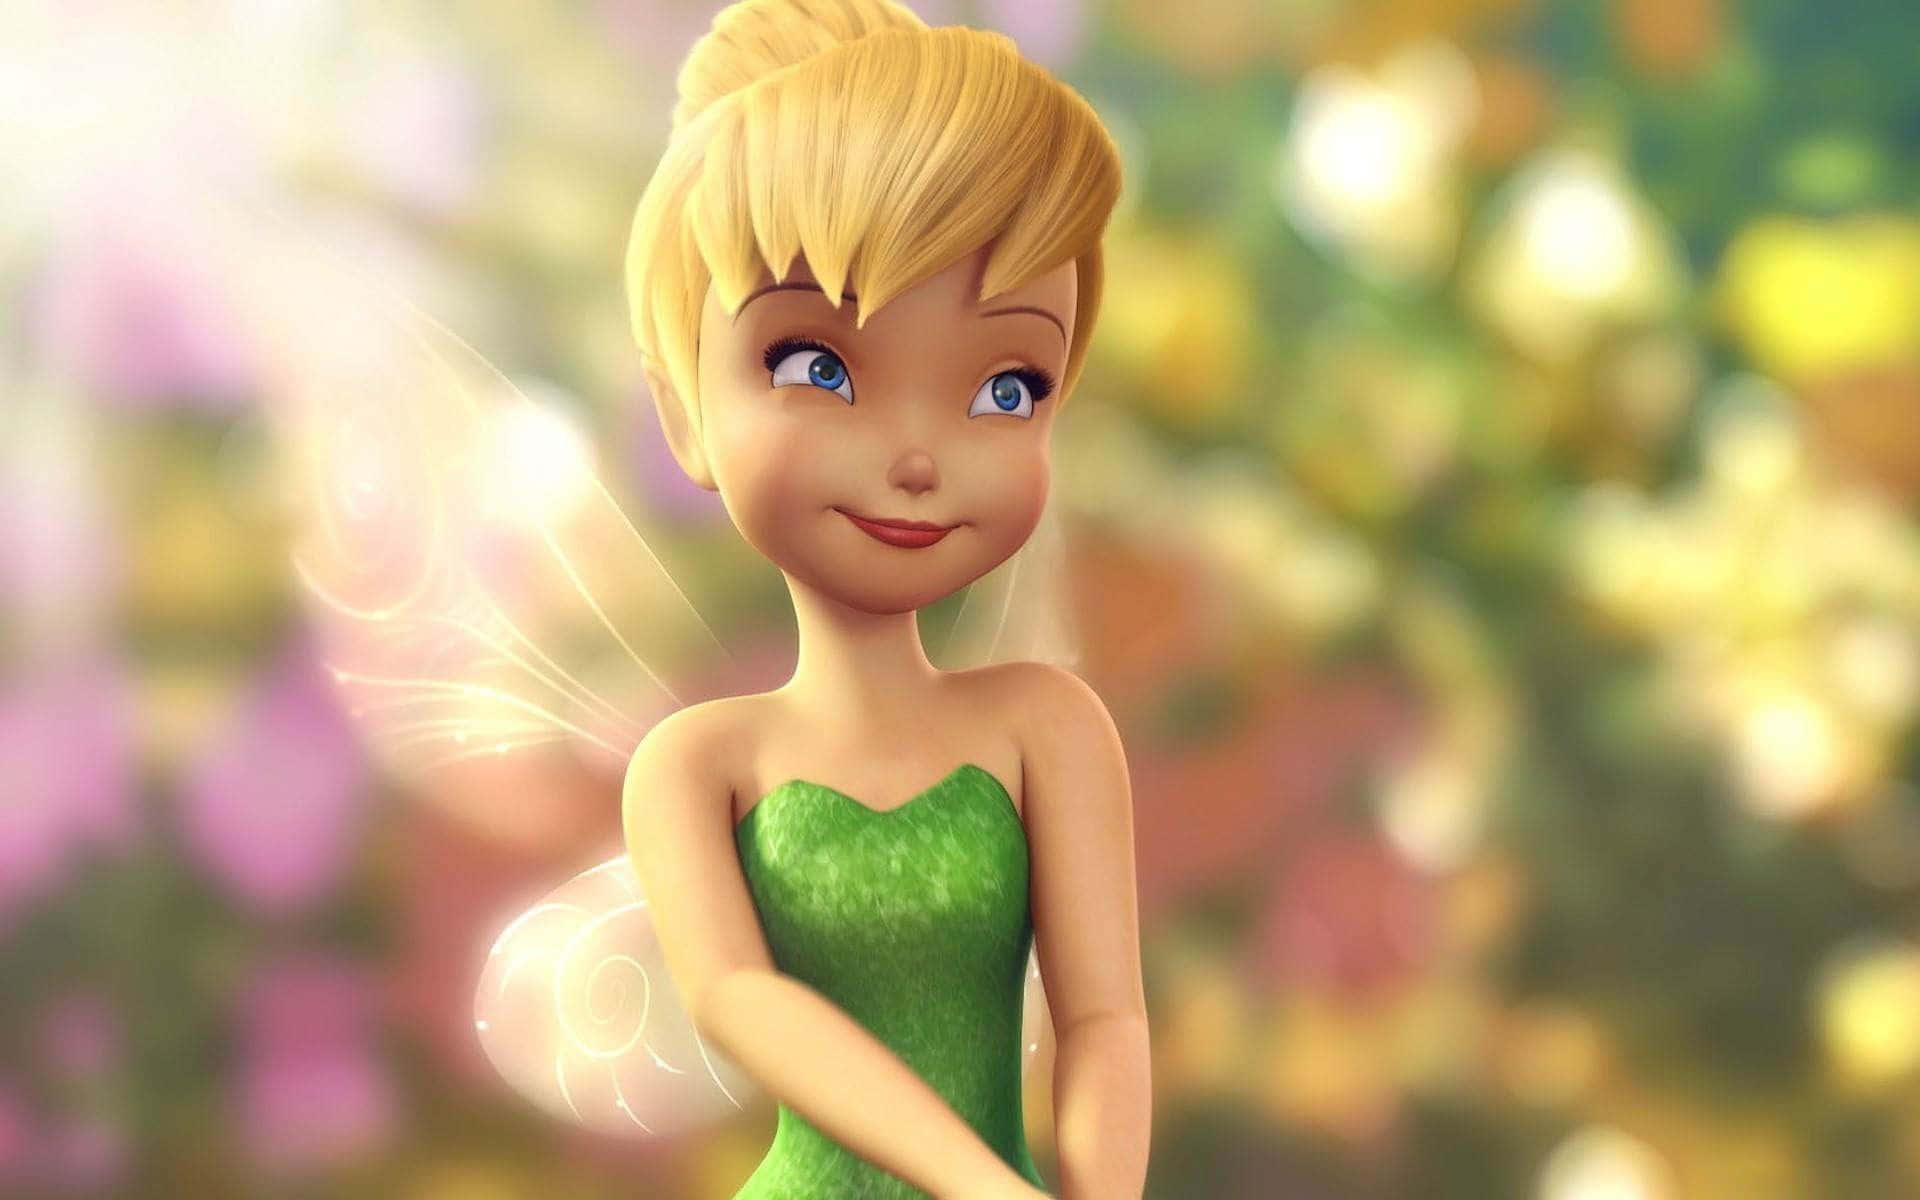 Tinkerbell sparkling in the mystical forest